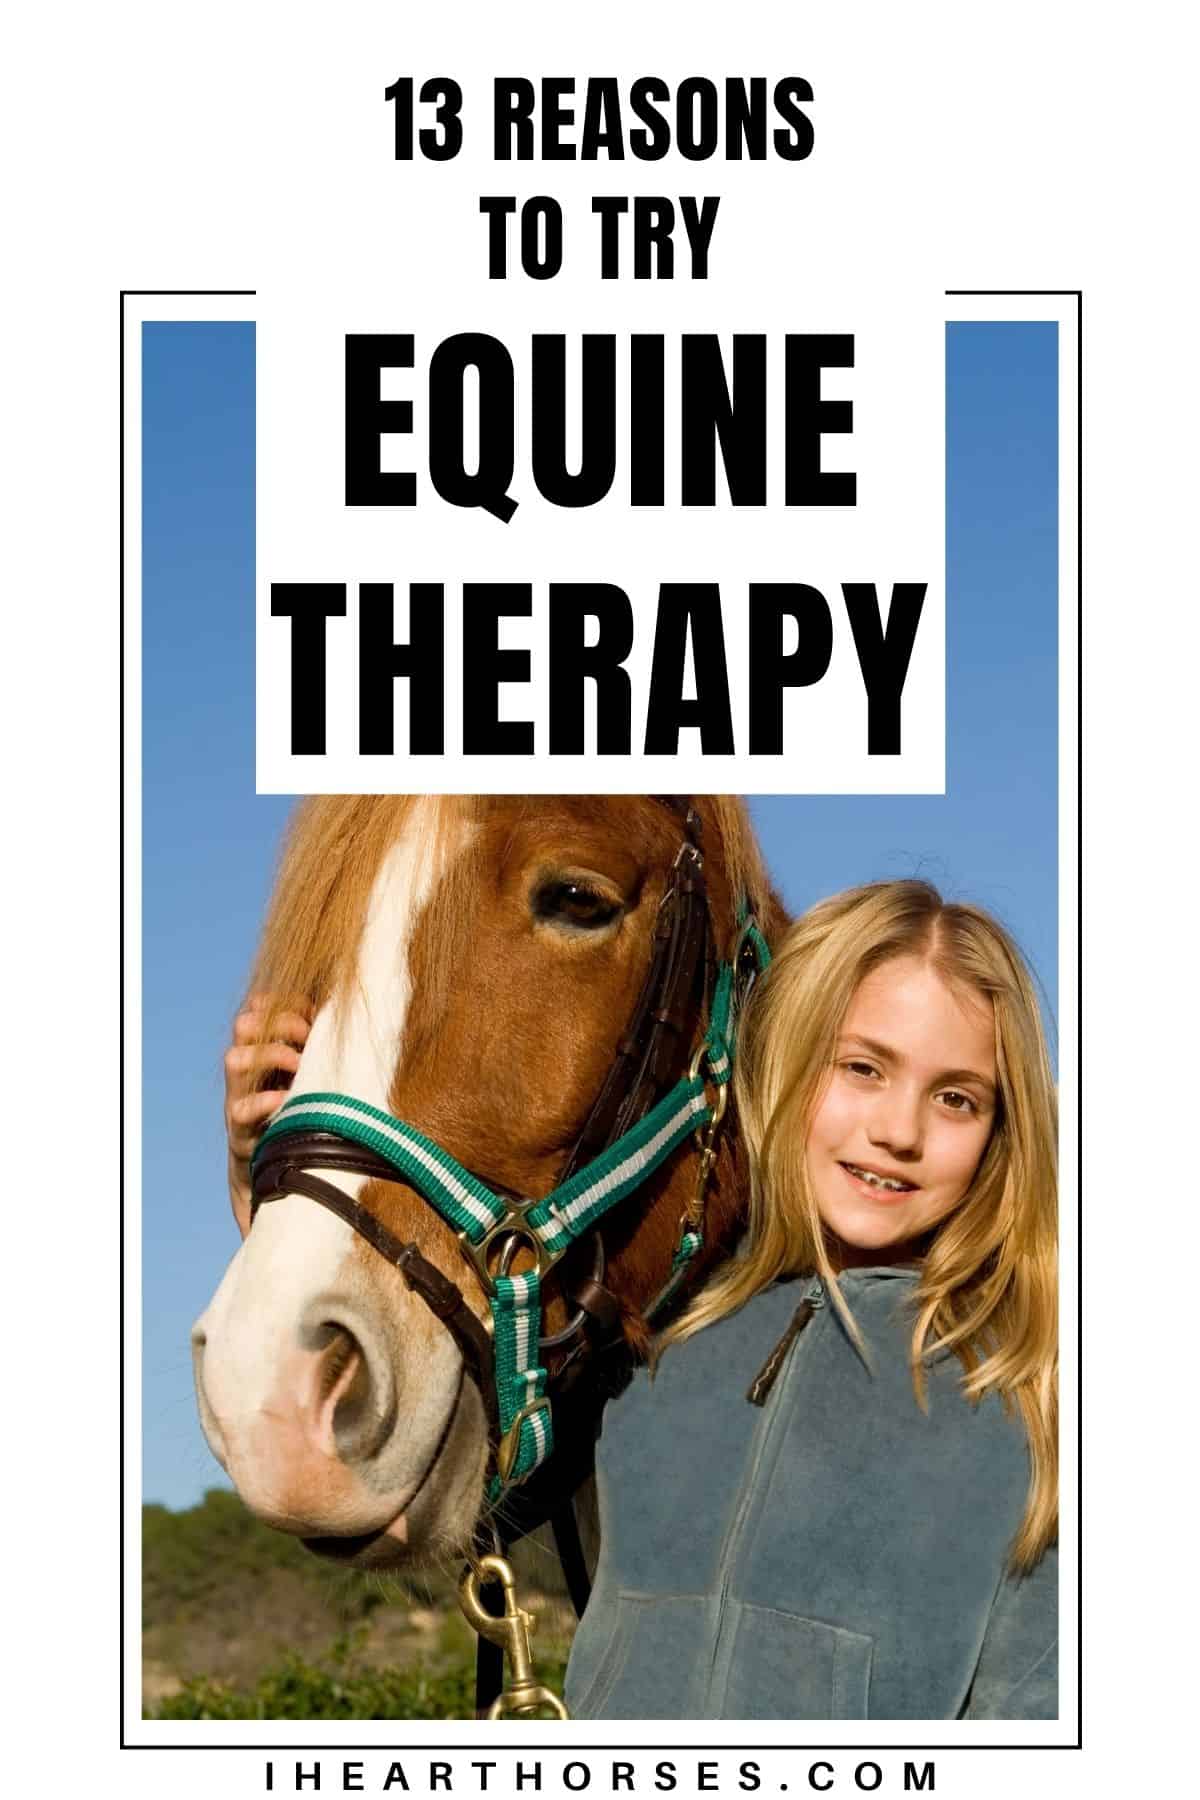 Girl holding reign of horse with white batnner saying reasons to try equine therapy